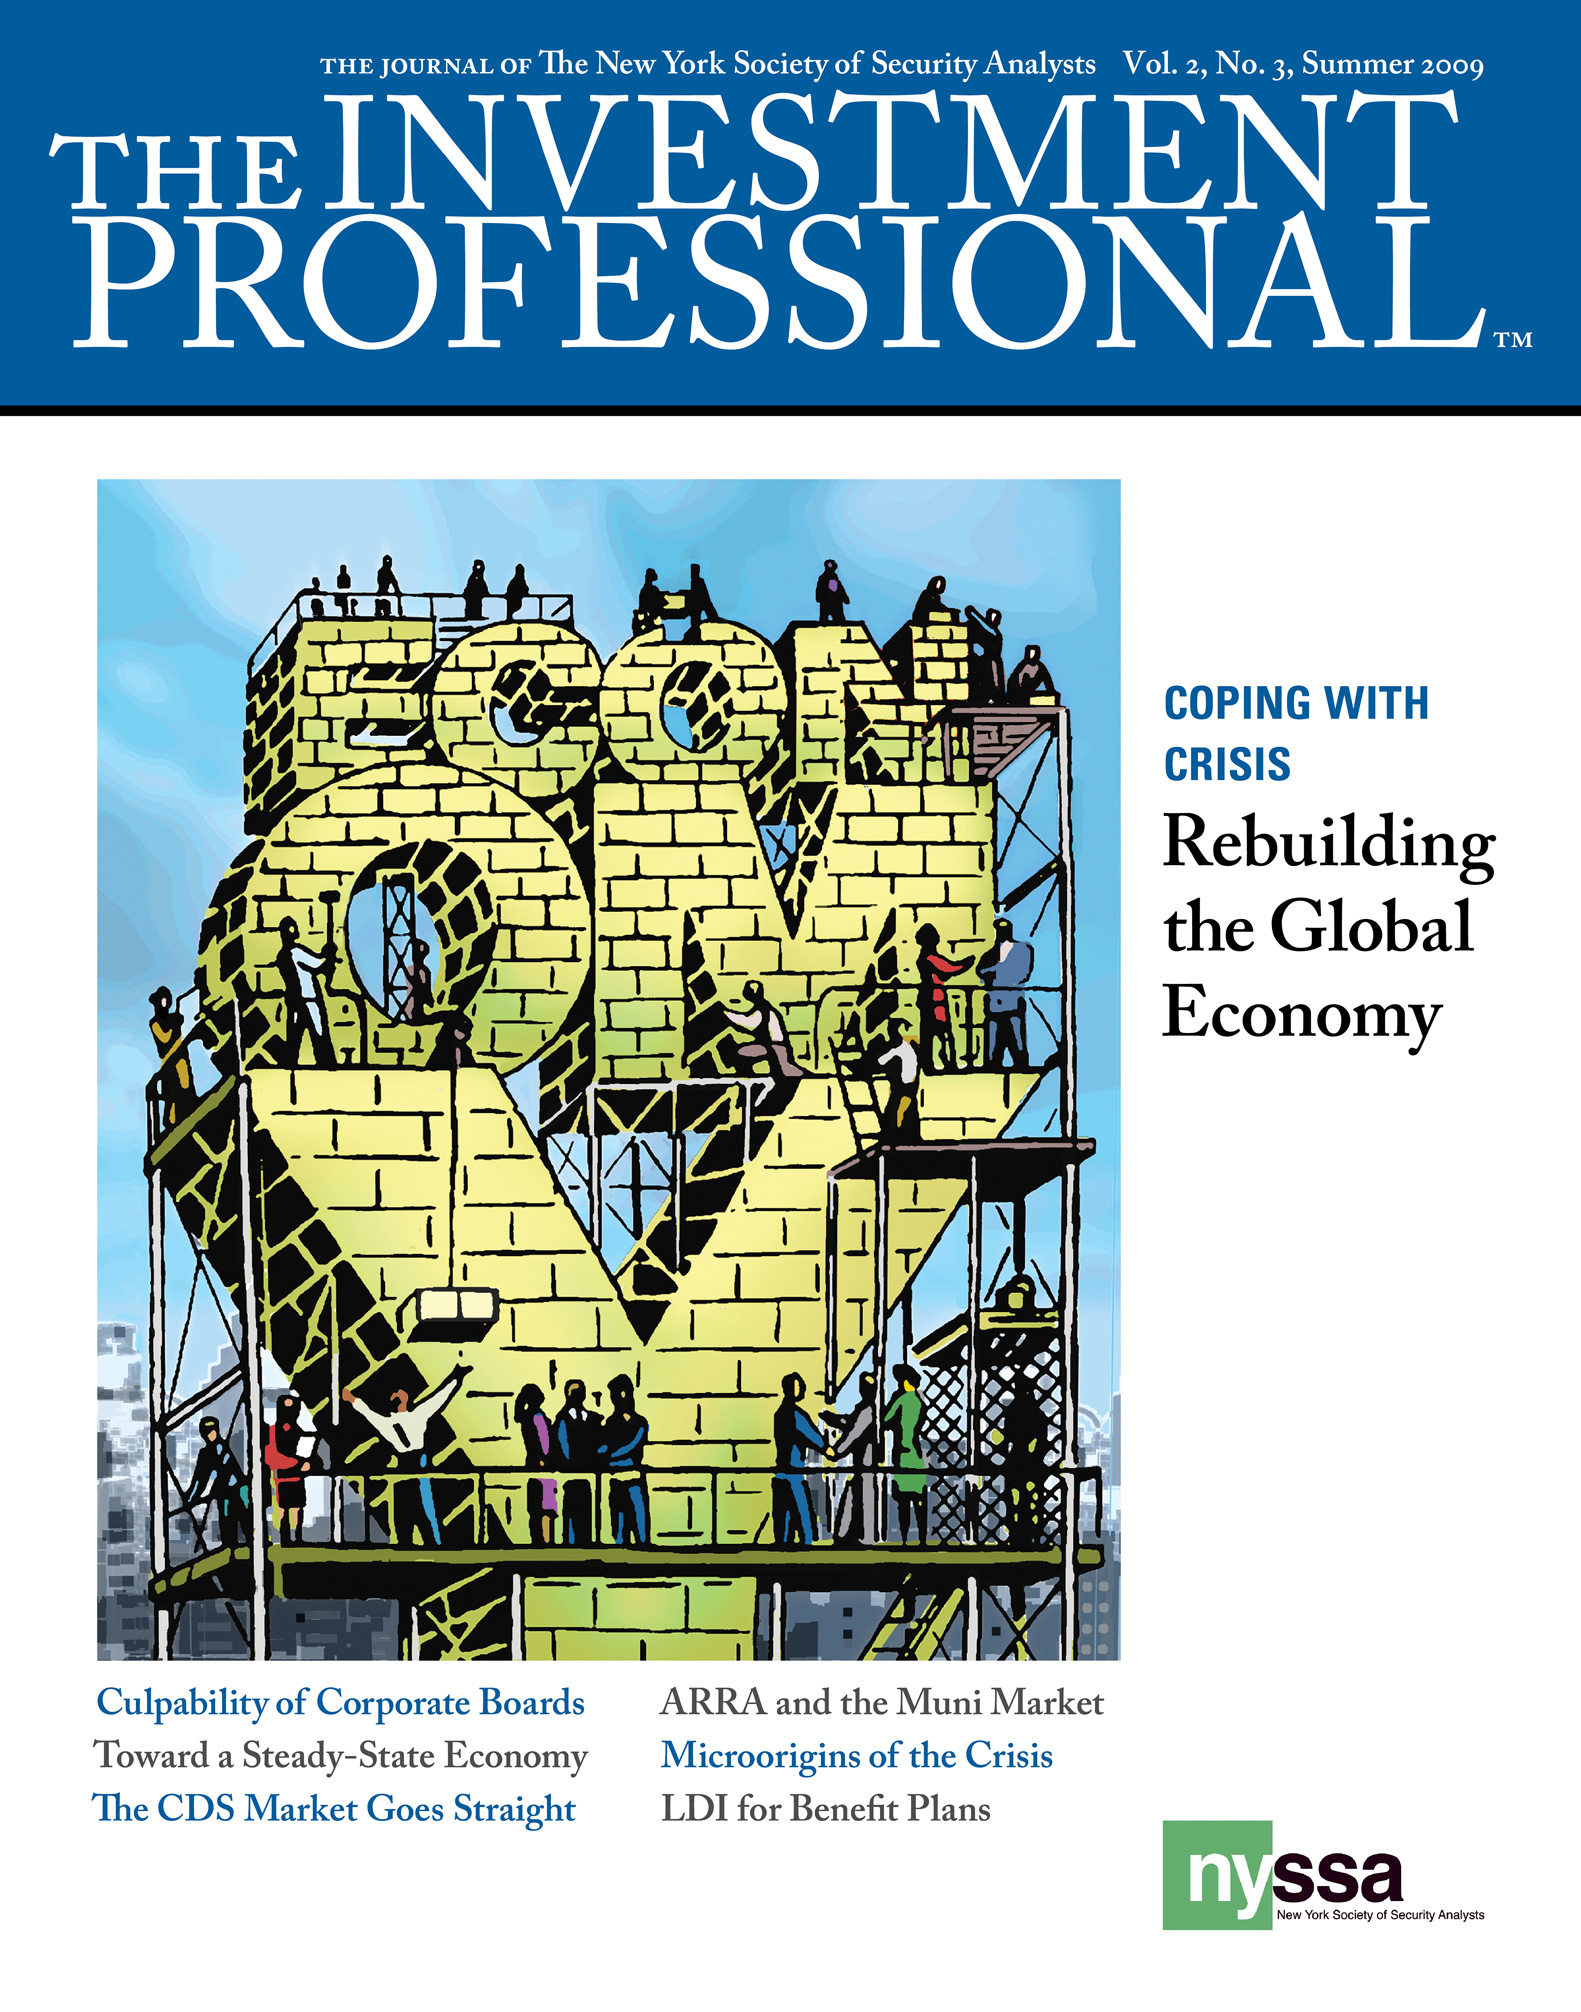 Cover of The Investment Professional with an illustration of construction workers building the word 'Economy' in brick.